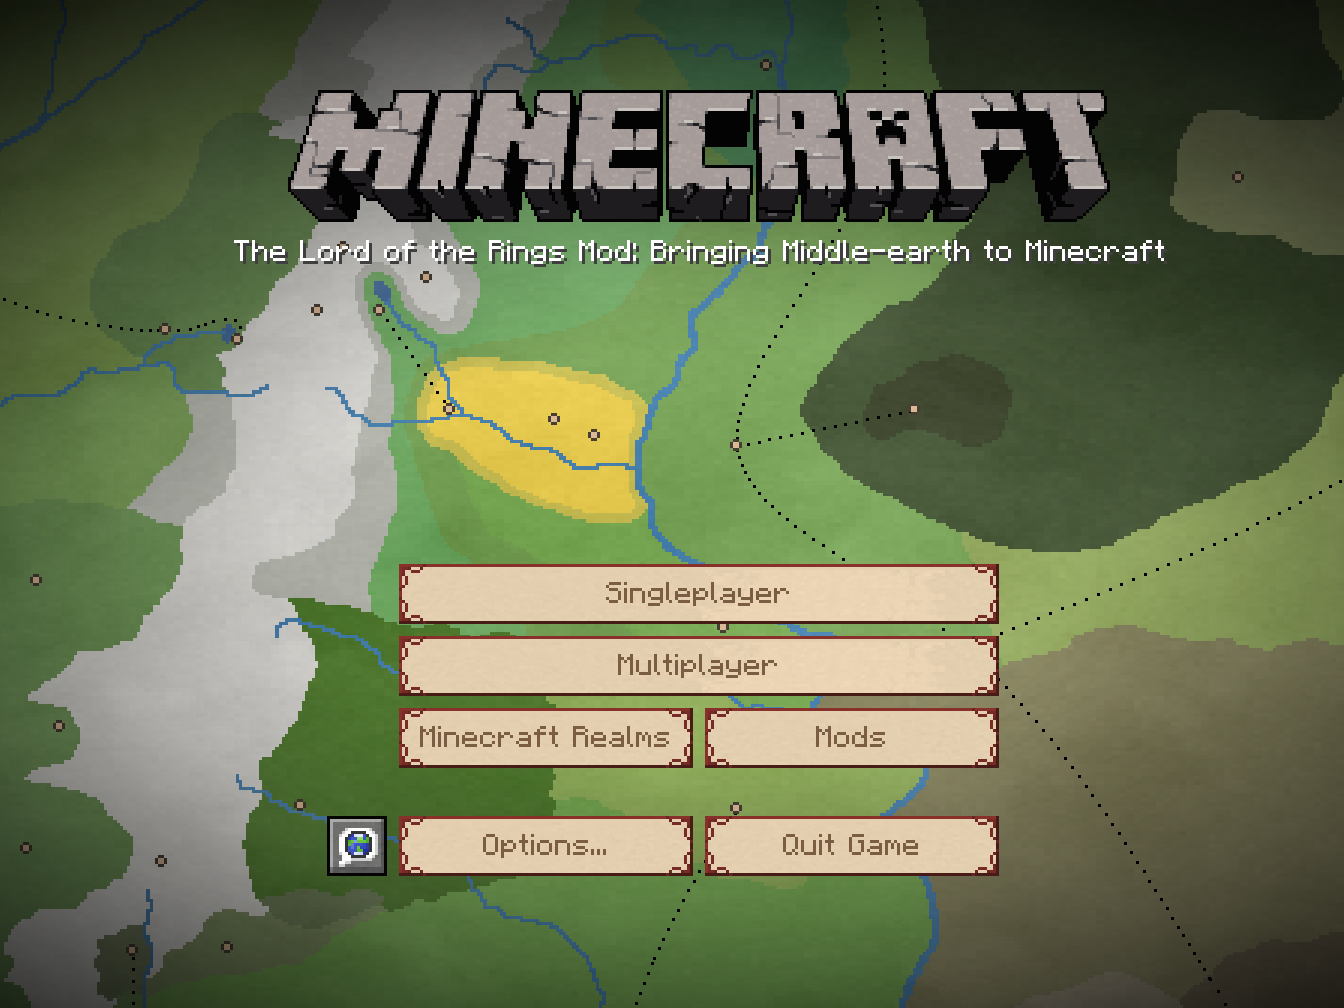 Build a Simple Game to Practice Drag Clicking, Minecraft, HTML, CSS